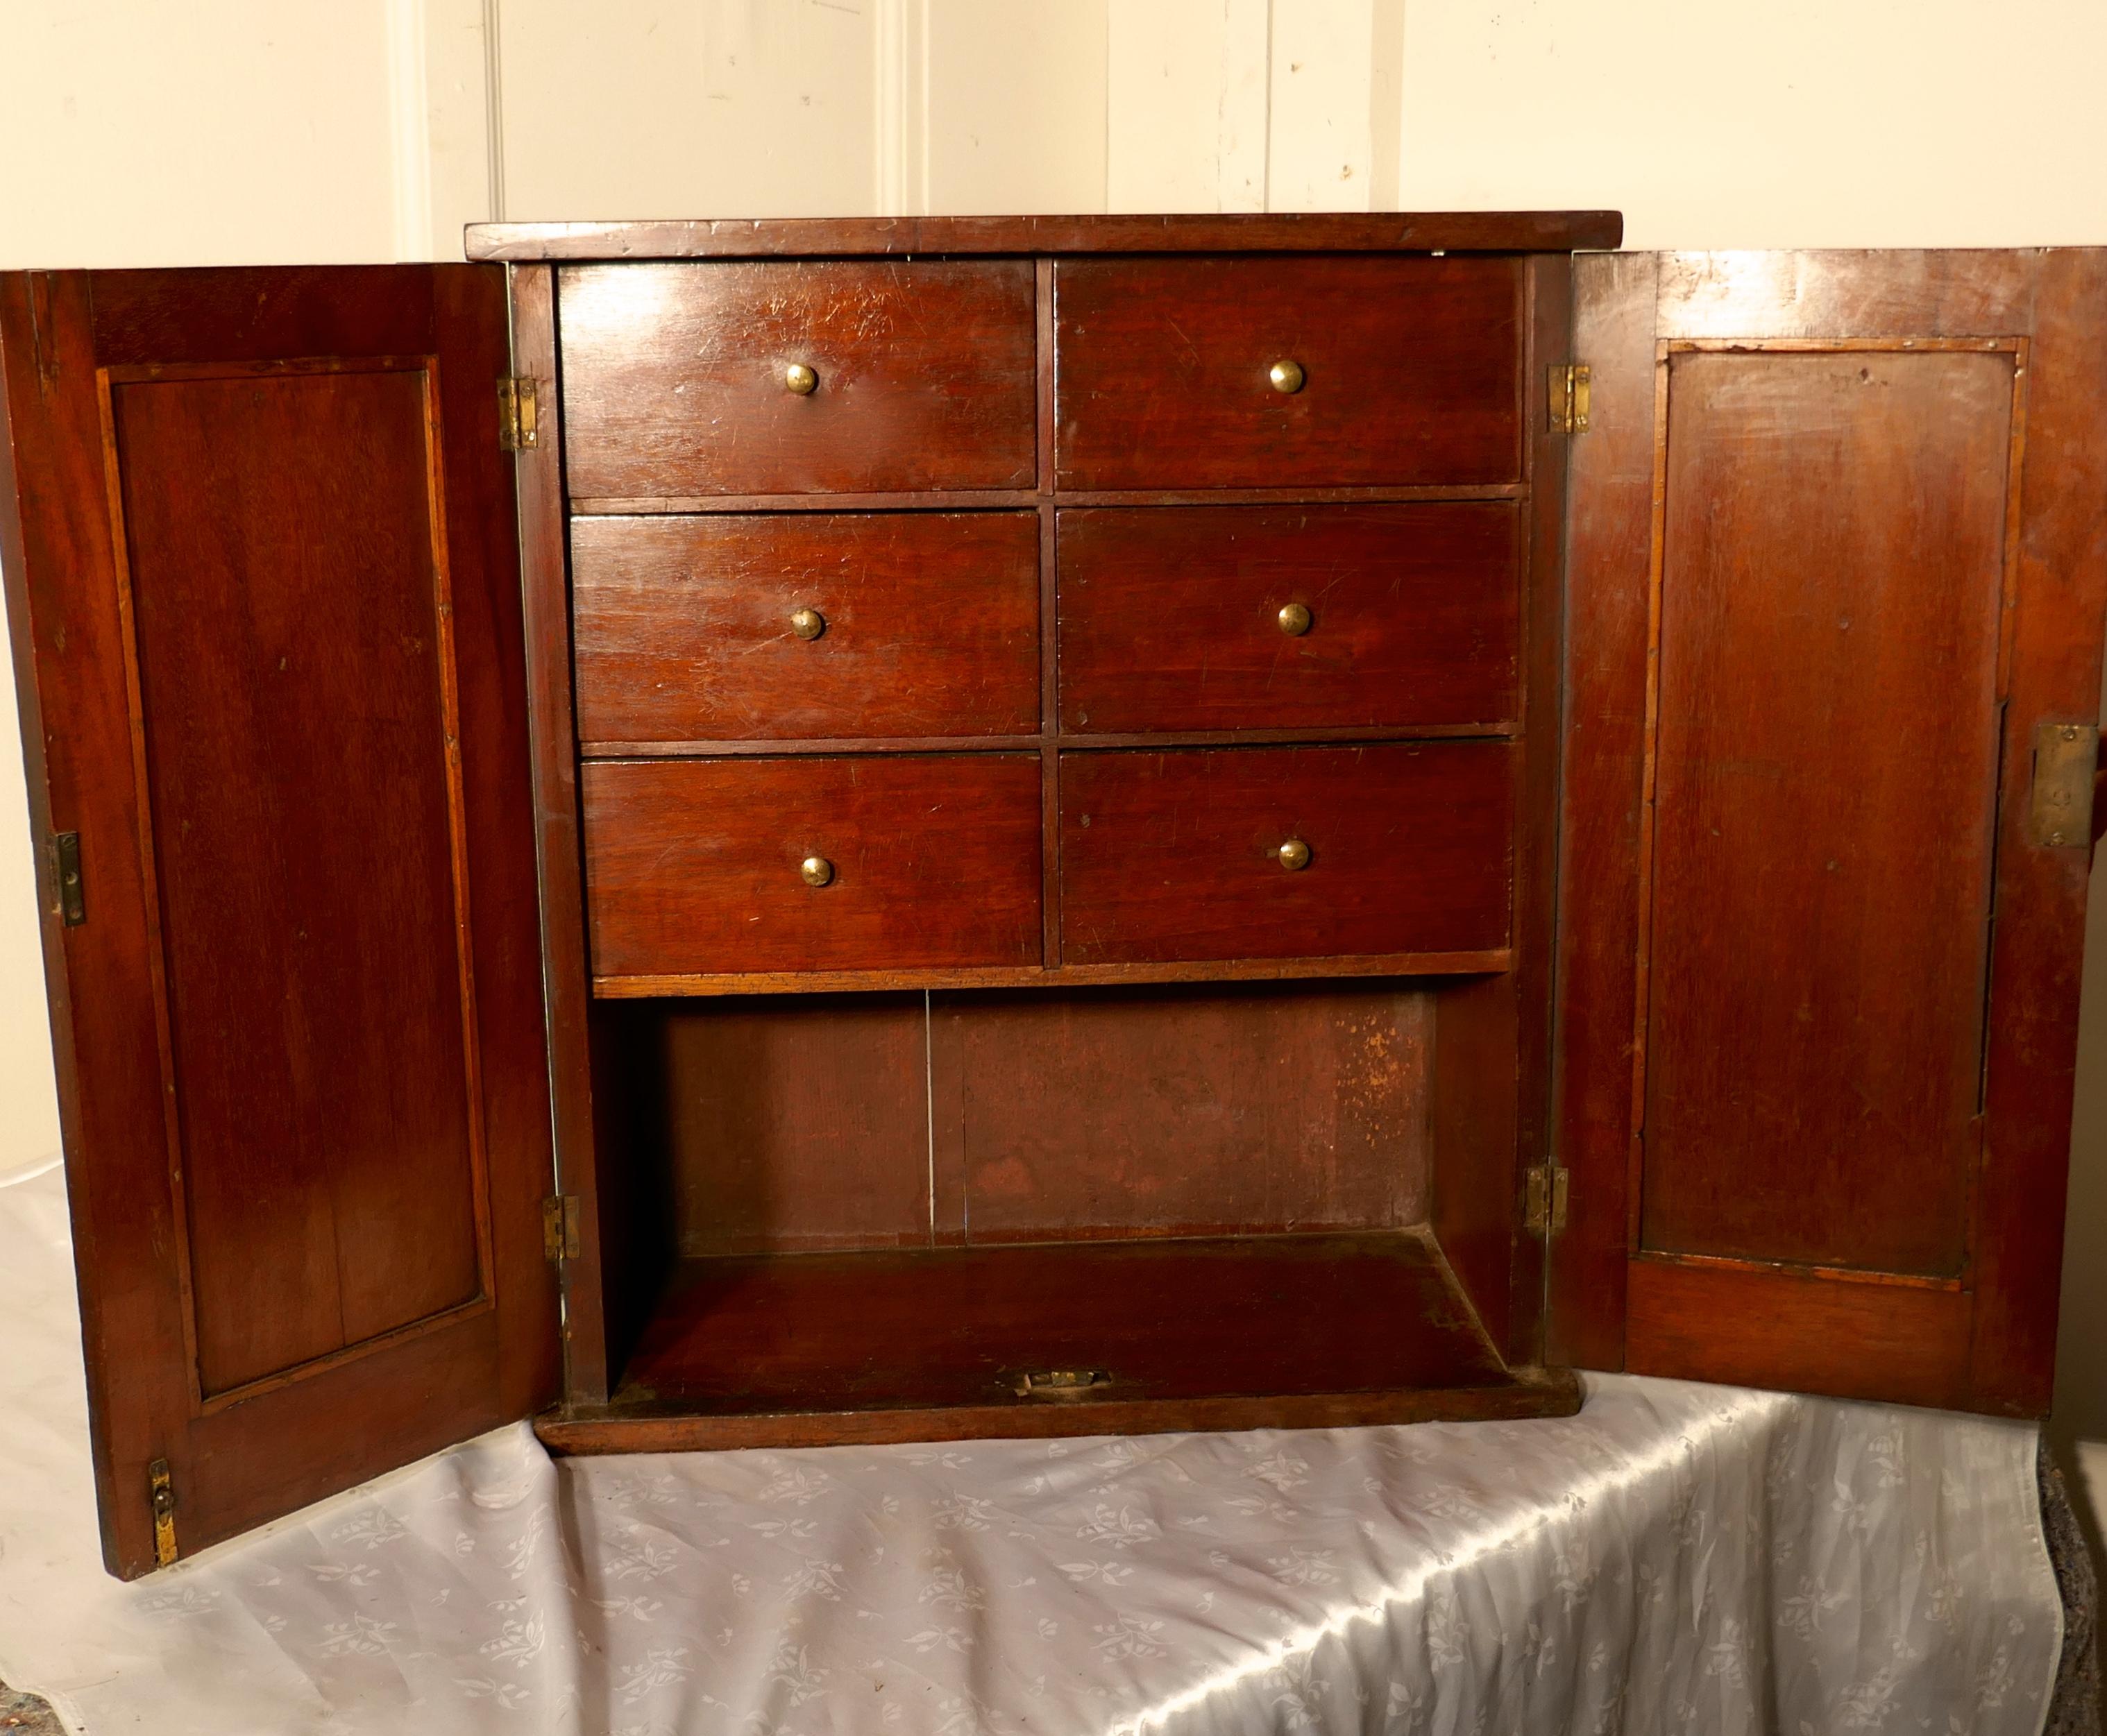 A Victorian mahogany collectors cabinet, with interior drawers

The cabinet has 2 panelled doors behind which there are 6 drawers 
The cabinet is made in solid mahogany it is in good sound condition with key and working lock
The cabinet is 20.5”